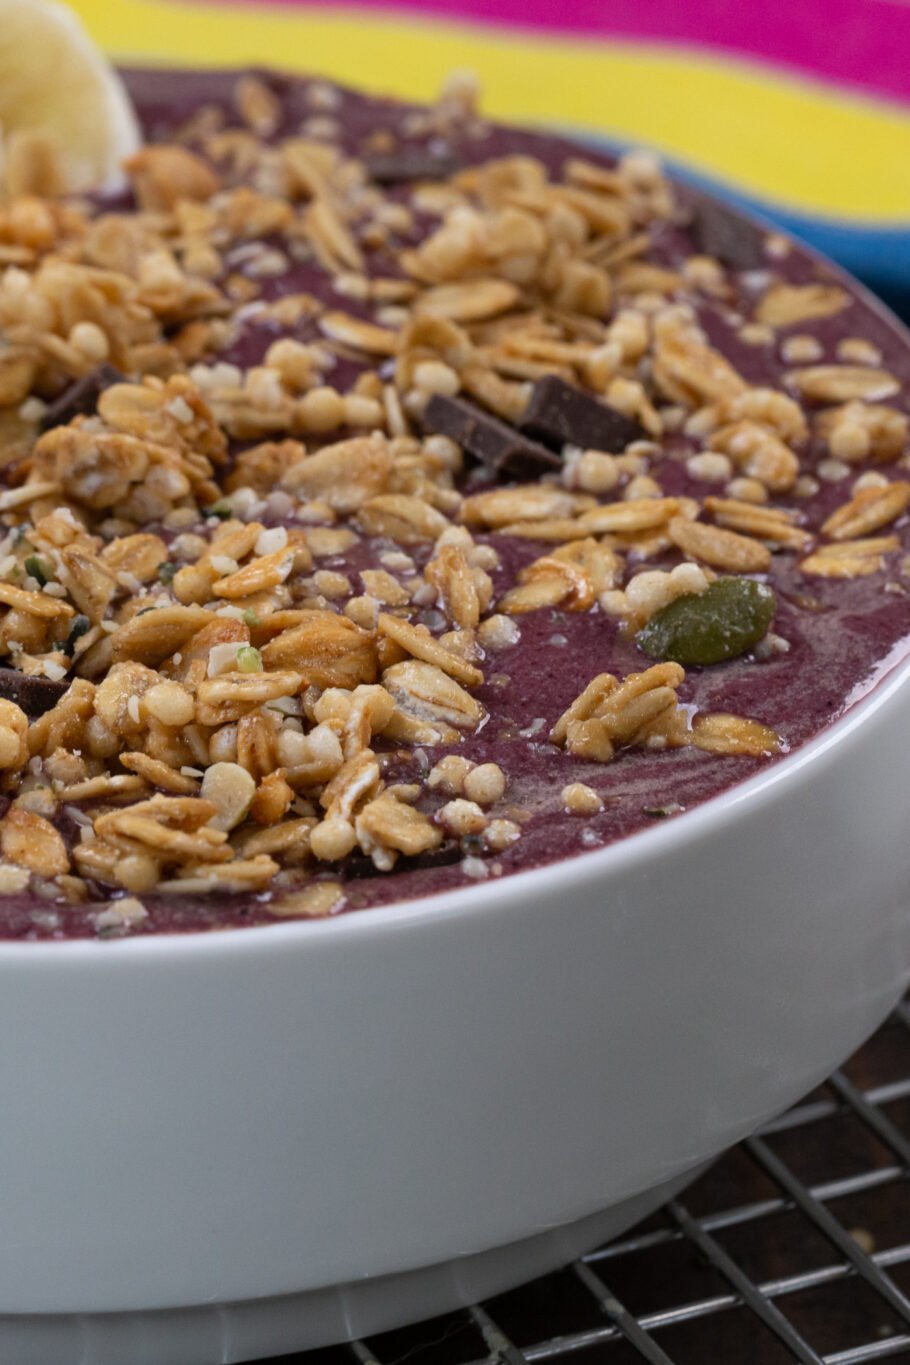 Protein Acai Bowl Recipe - The Nutty Scoop from Nuts.com